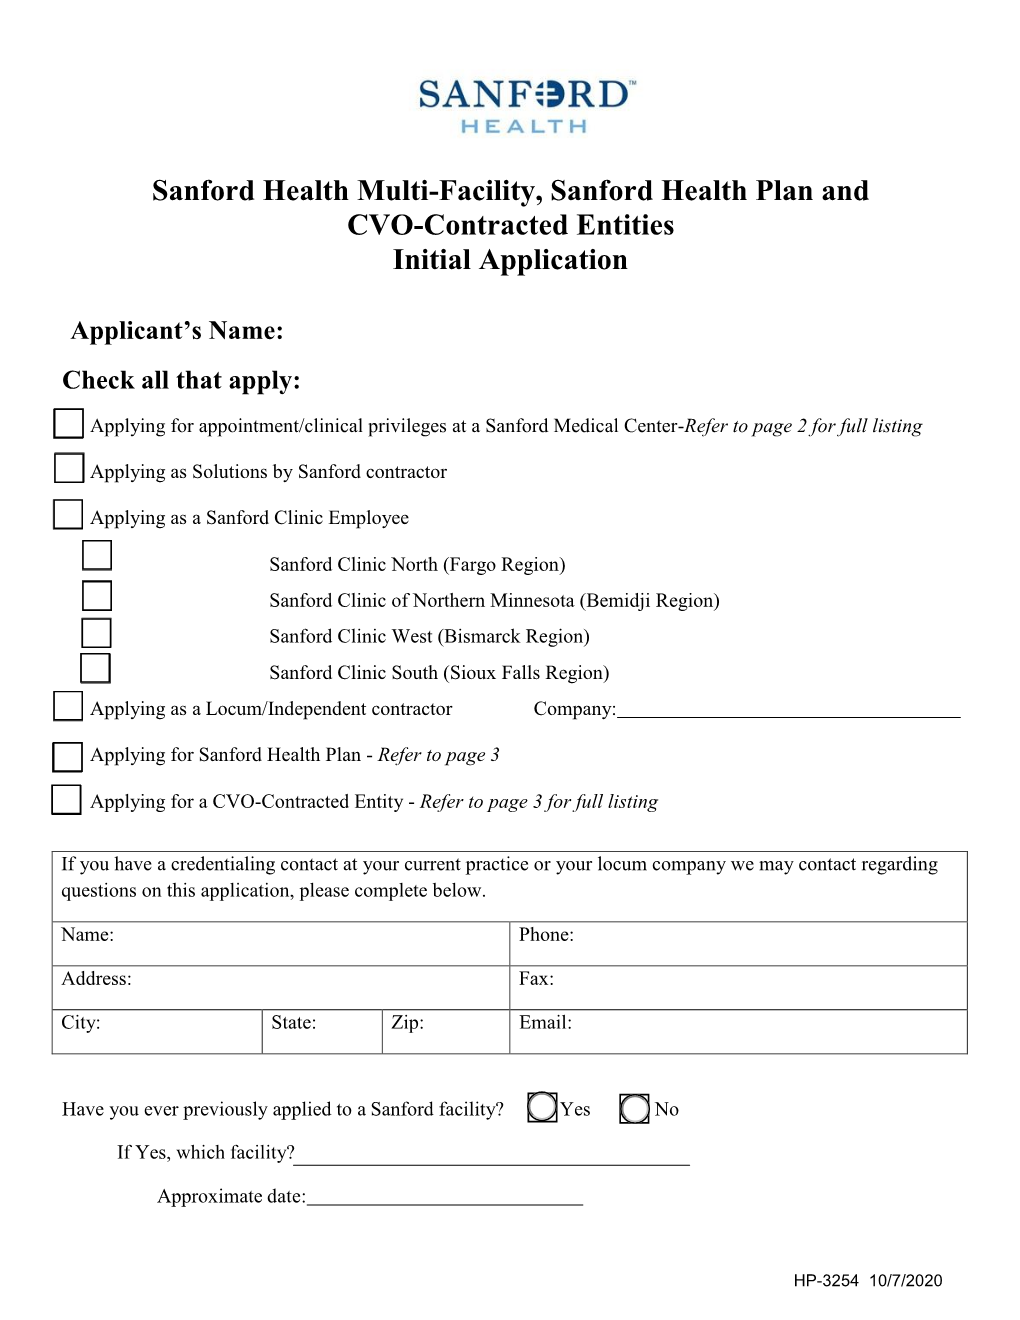 Sanford Health Multi-Facility, Sanford Health Plan and CVO-Contracted Entities Initial Application